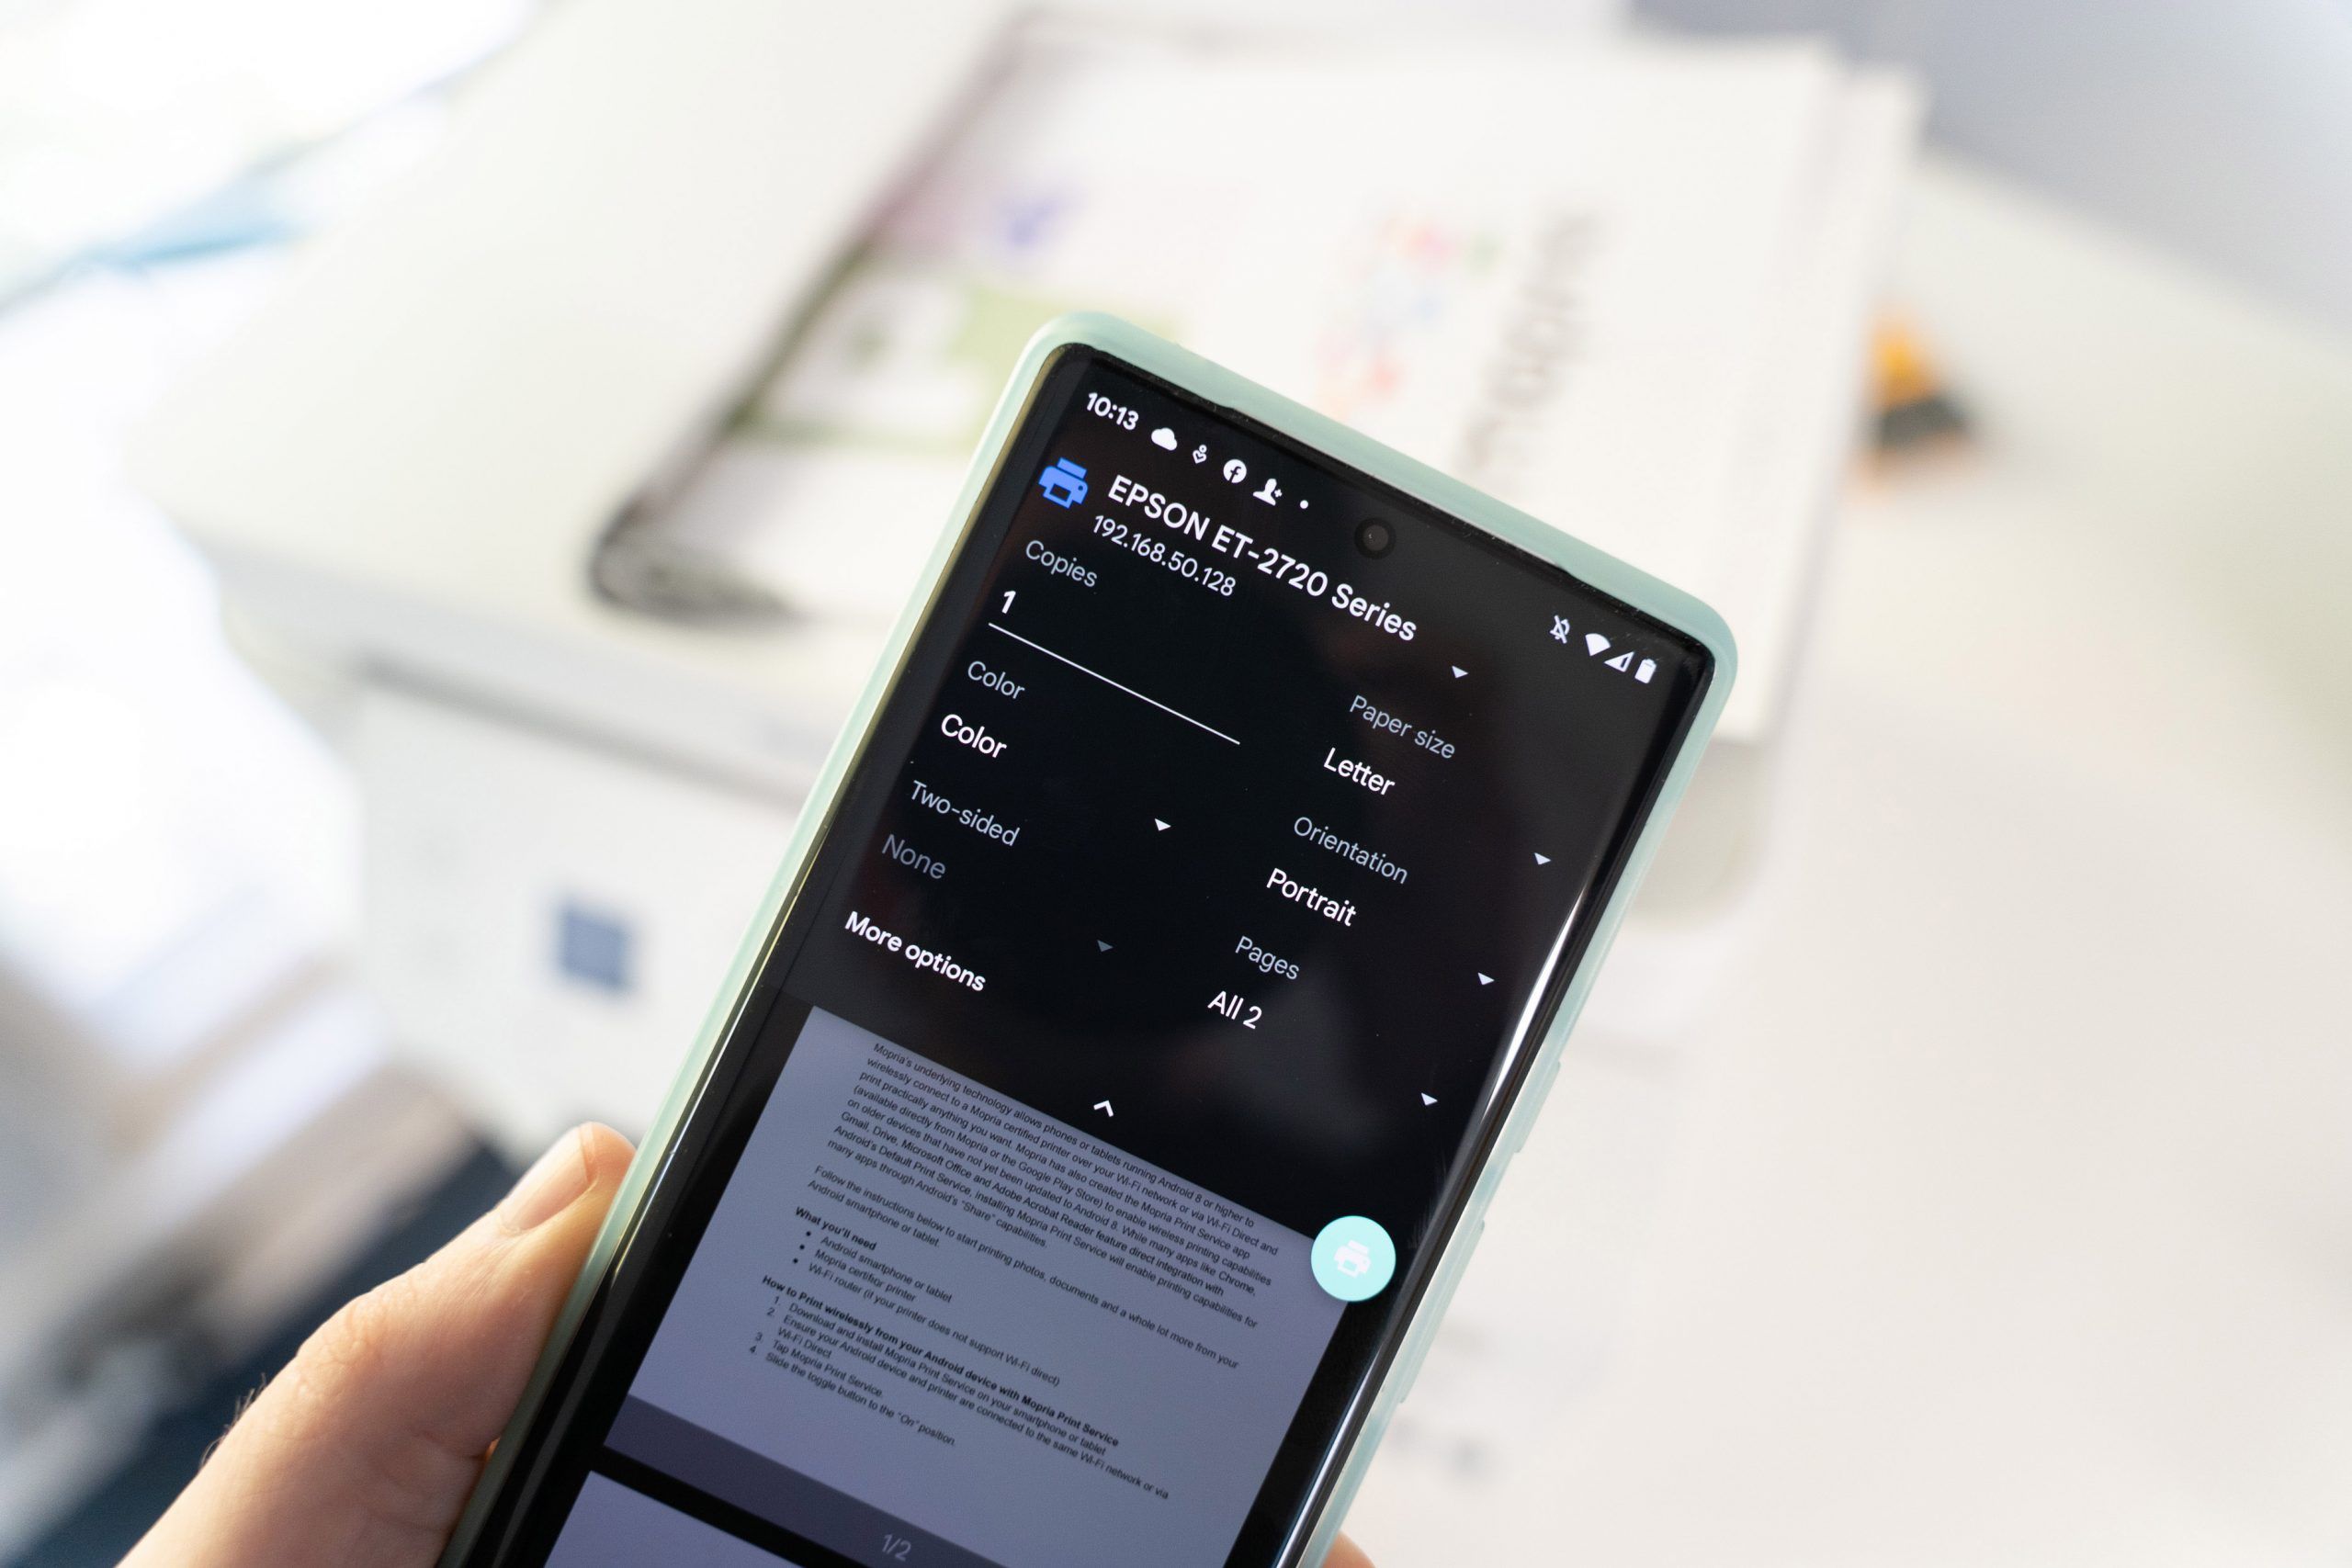 How To Connect Samsung Phone To Printer